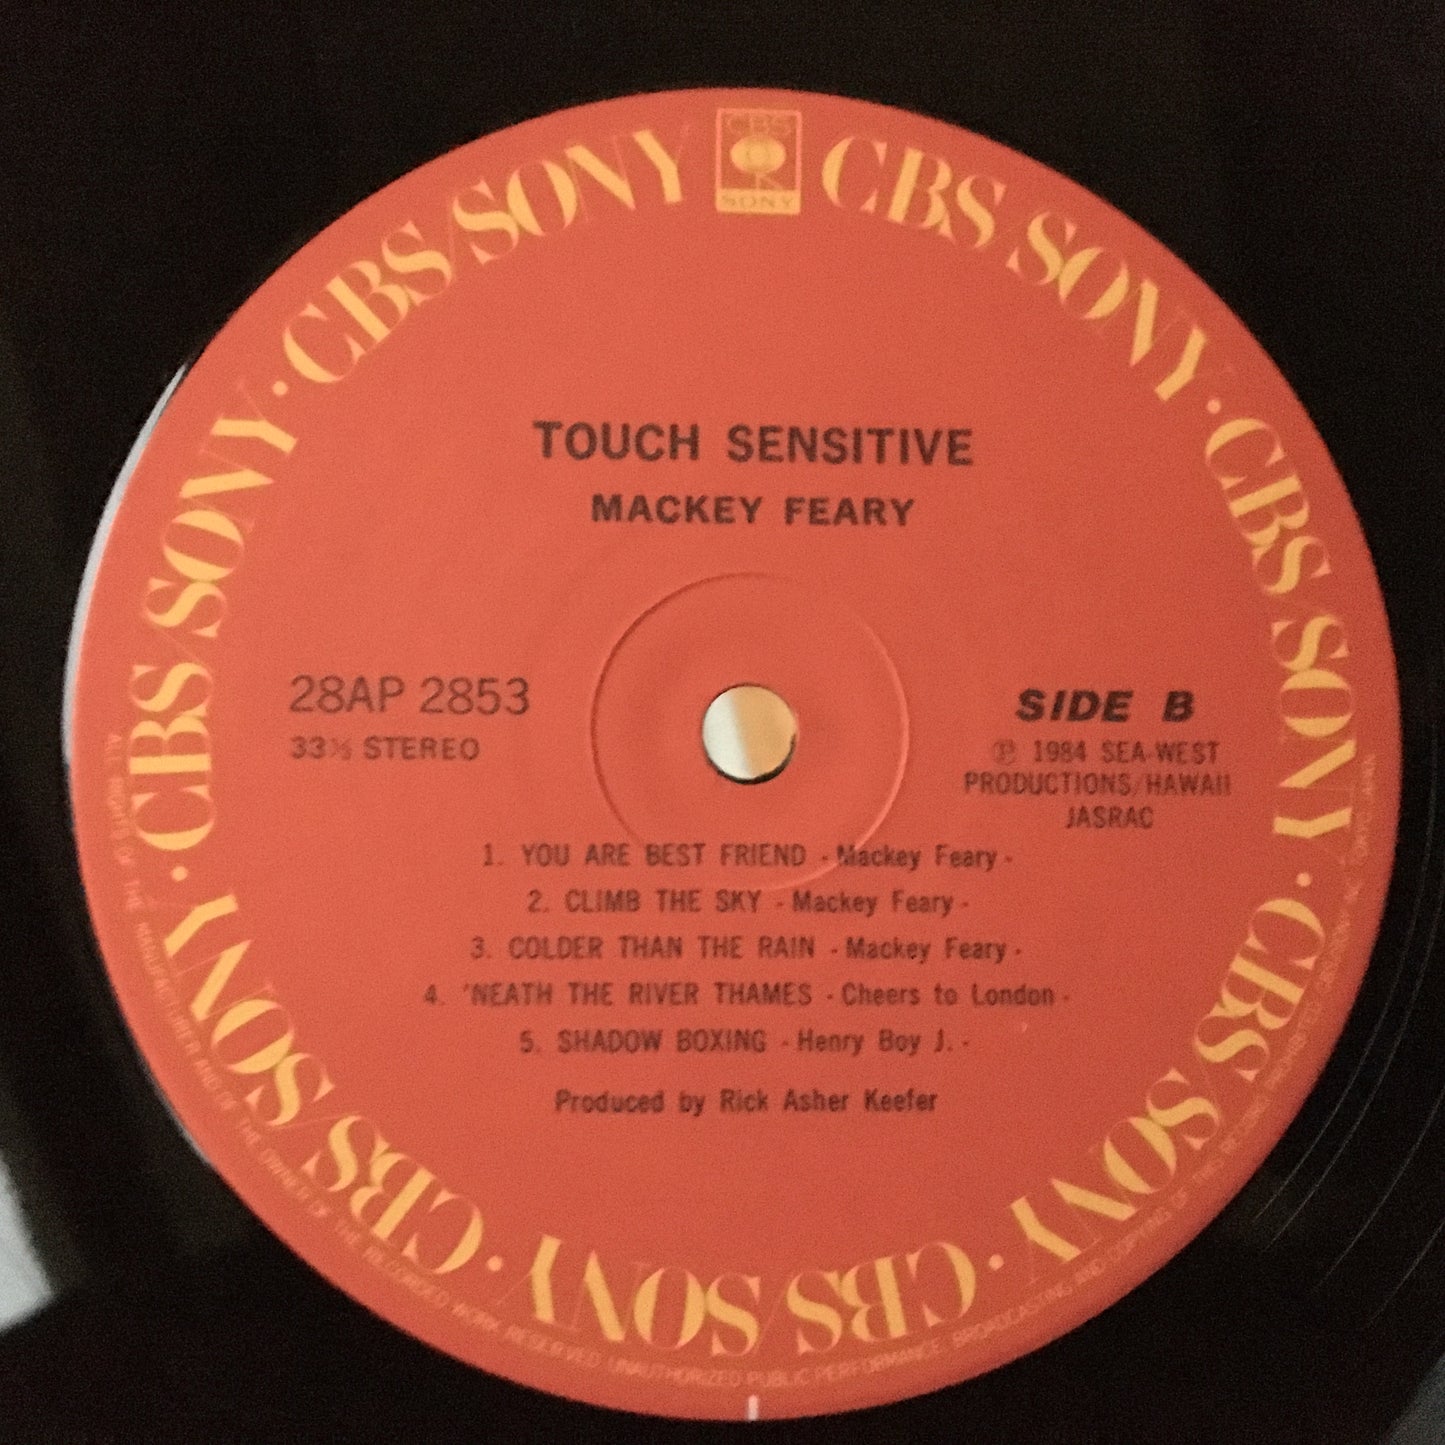 Mackey Feary – Touch Sensitive